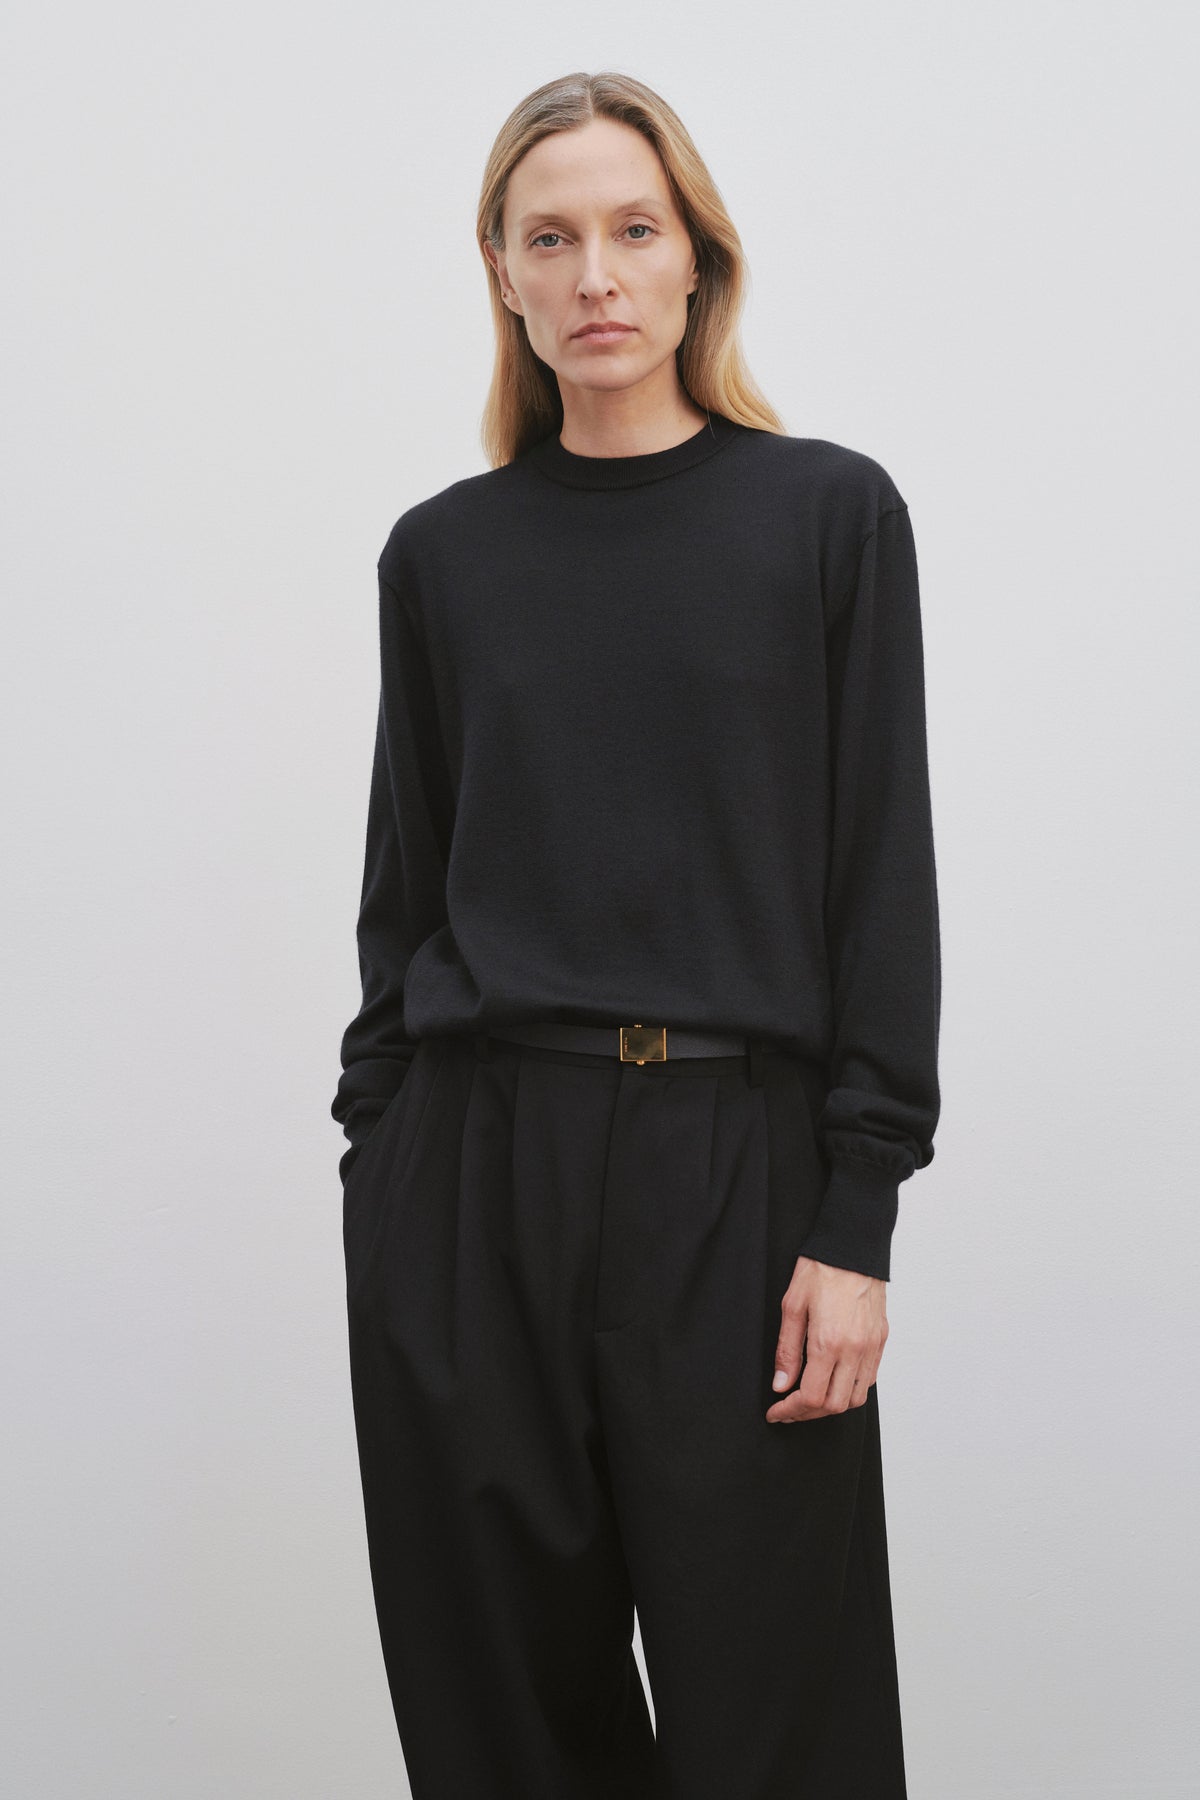 Druyes Top in lana e cashmere 